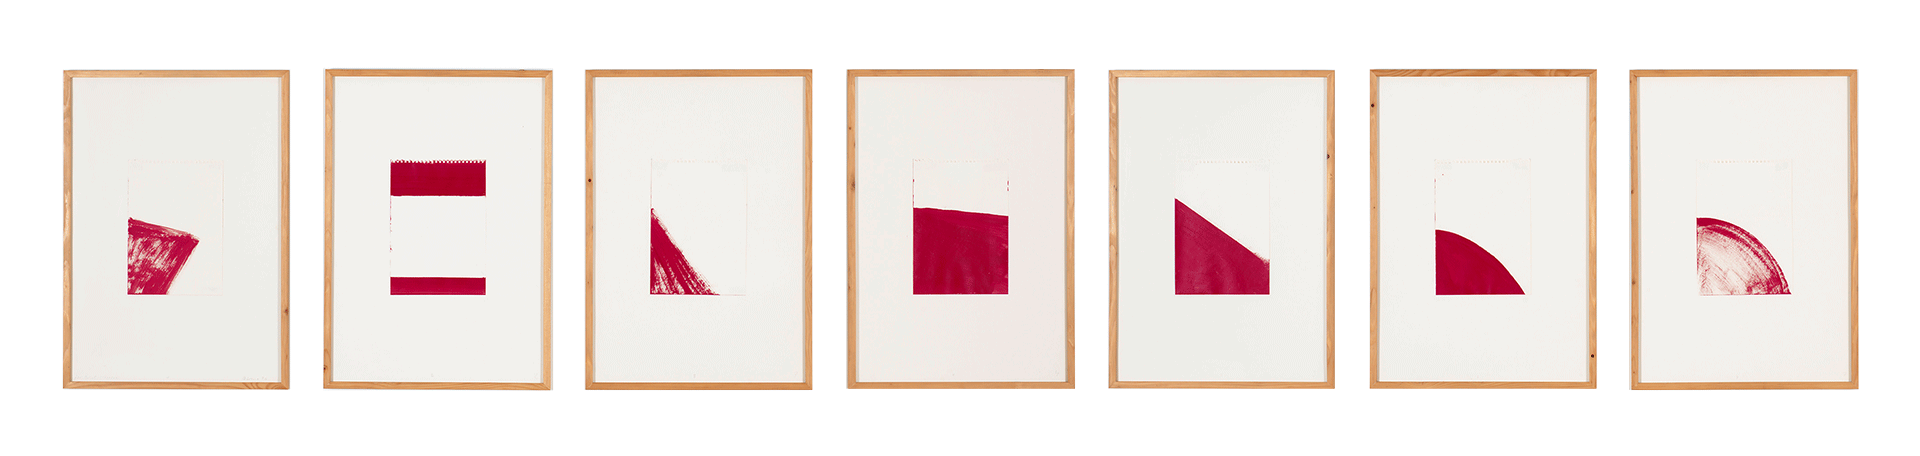 An installation view of drawings by Palermo, titled 1-7 Untitled (for Babette), dated 1976.